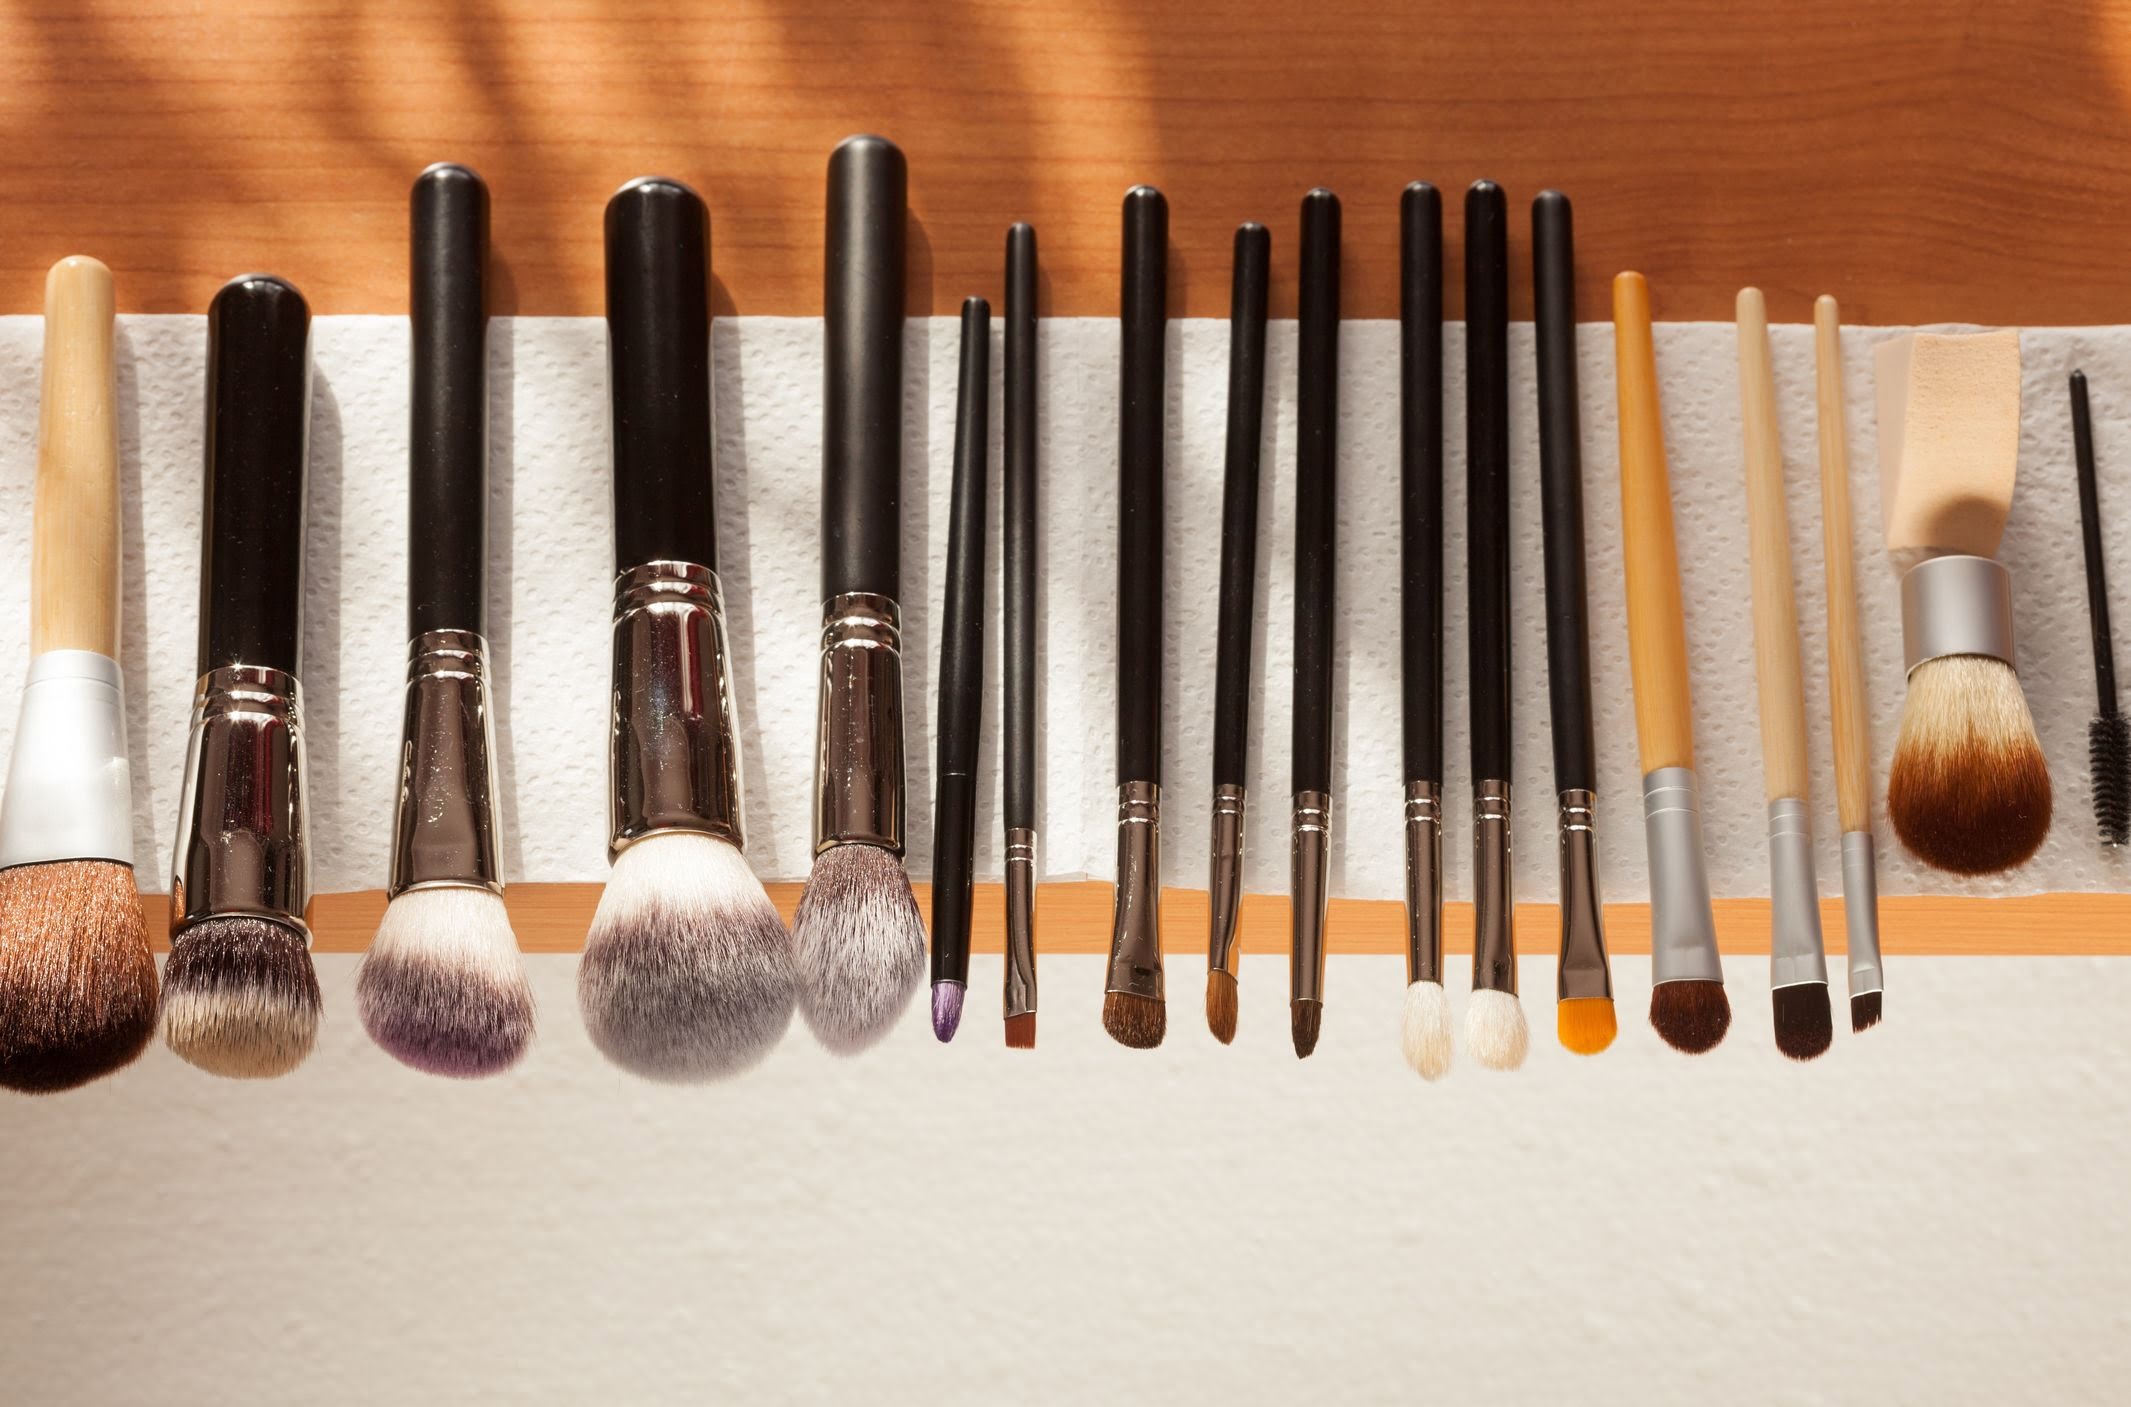 Ways to clean makeup brushes